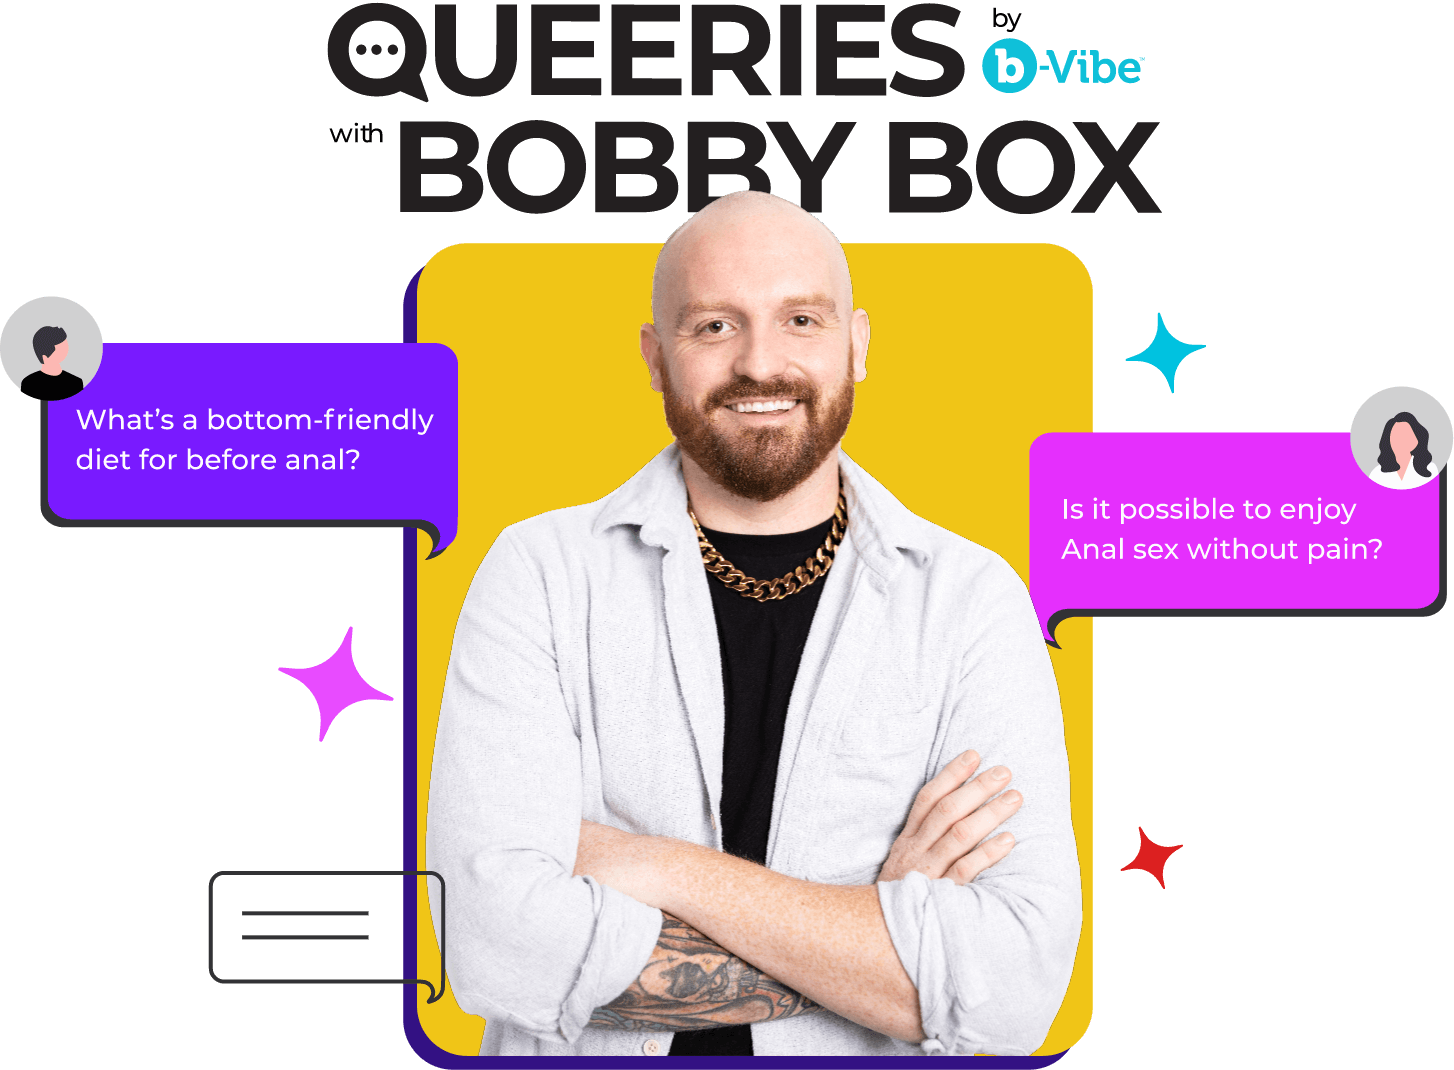 Queeries by b-Vibe with Bobby Box